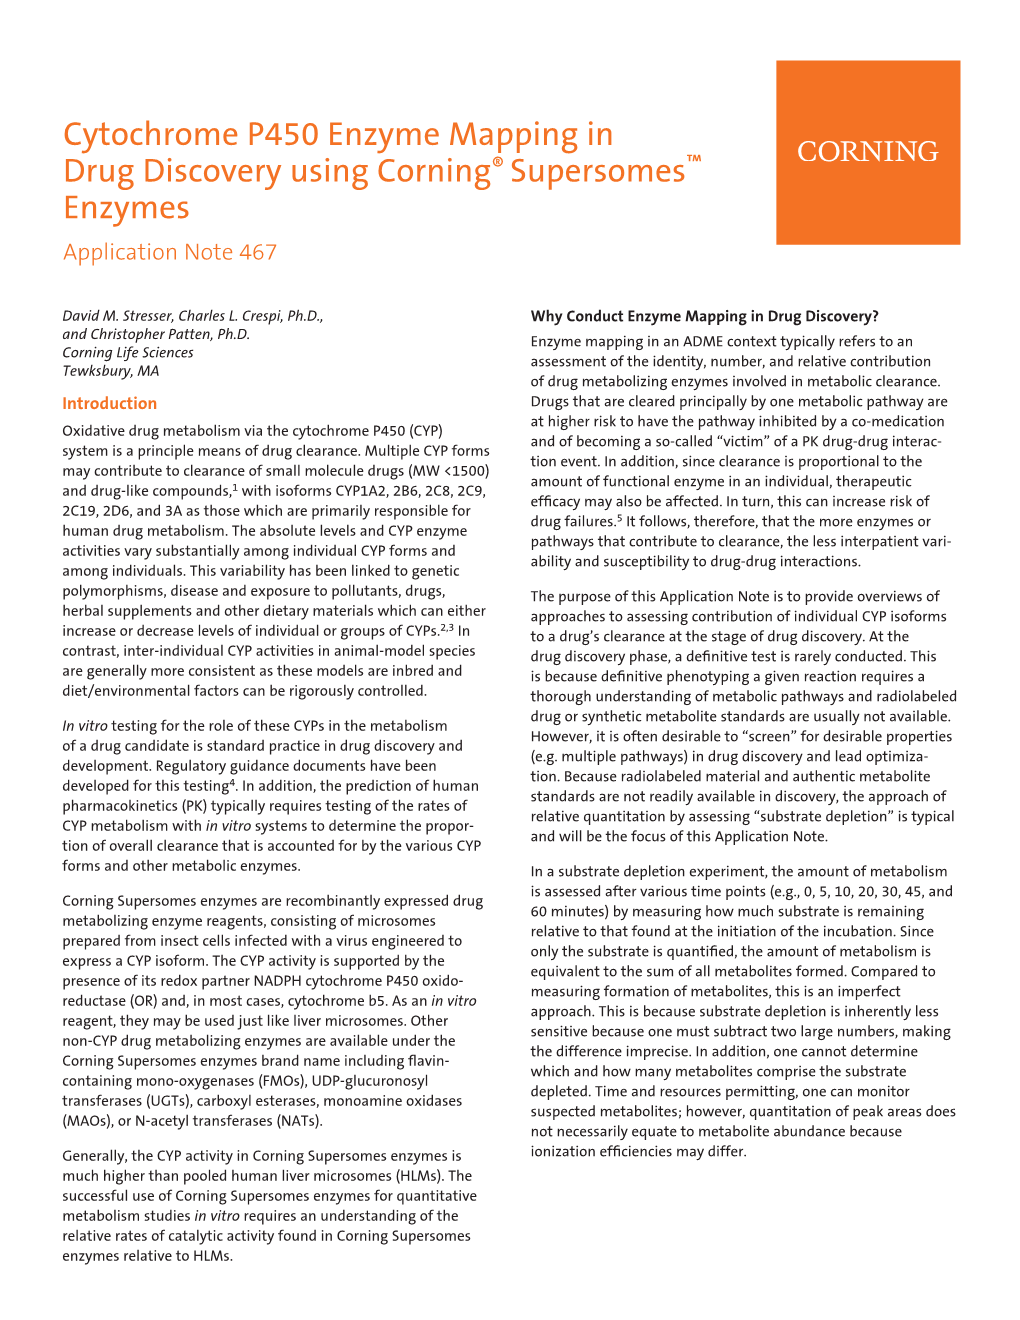 Cytochrome P450 Enzyme Mapping in Drug Discovery Using Corning® Supersomes™ Enzymes Application Note 467